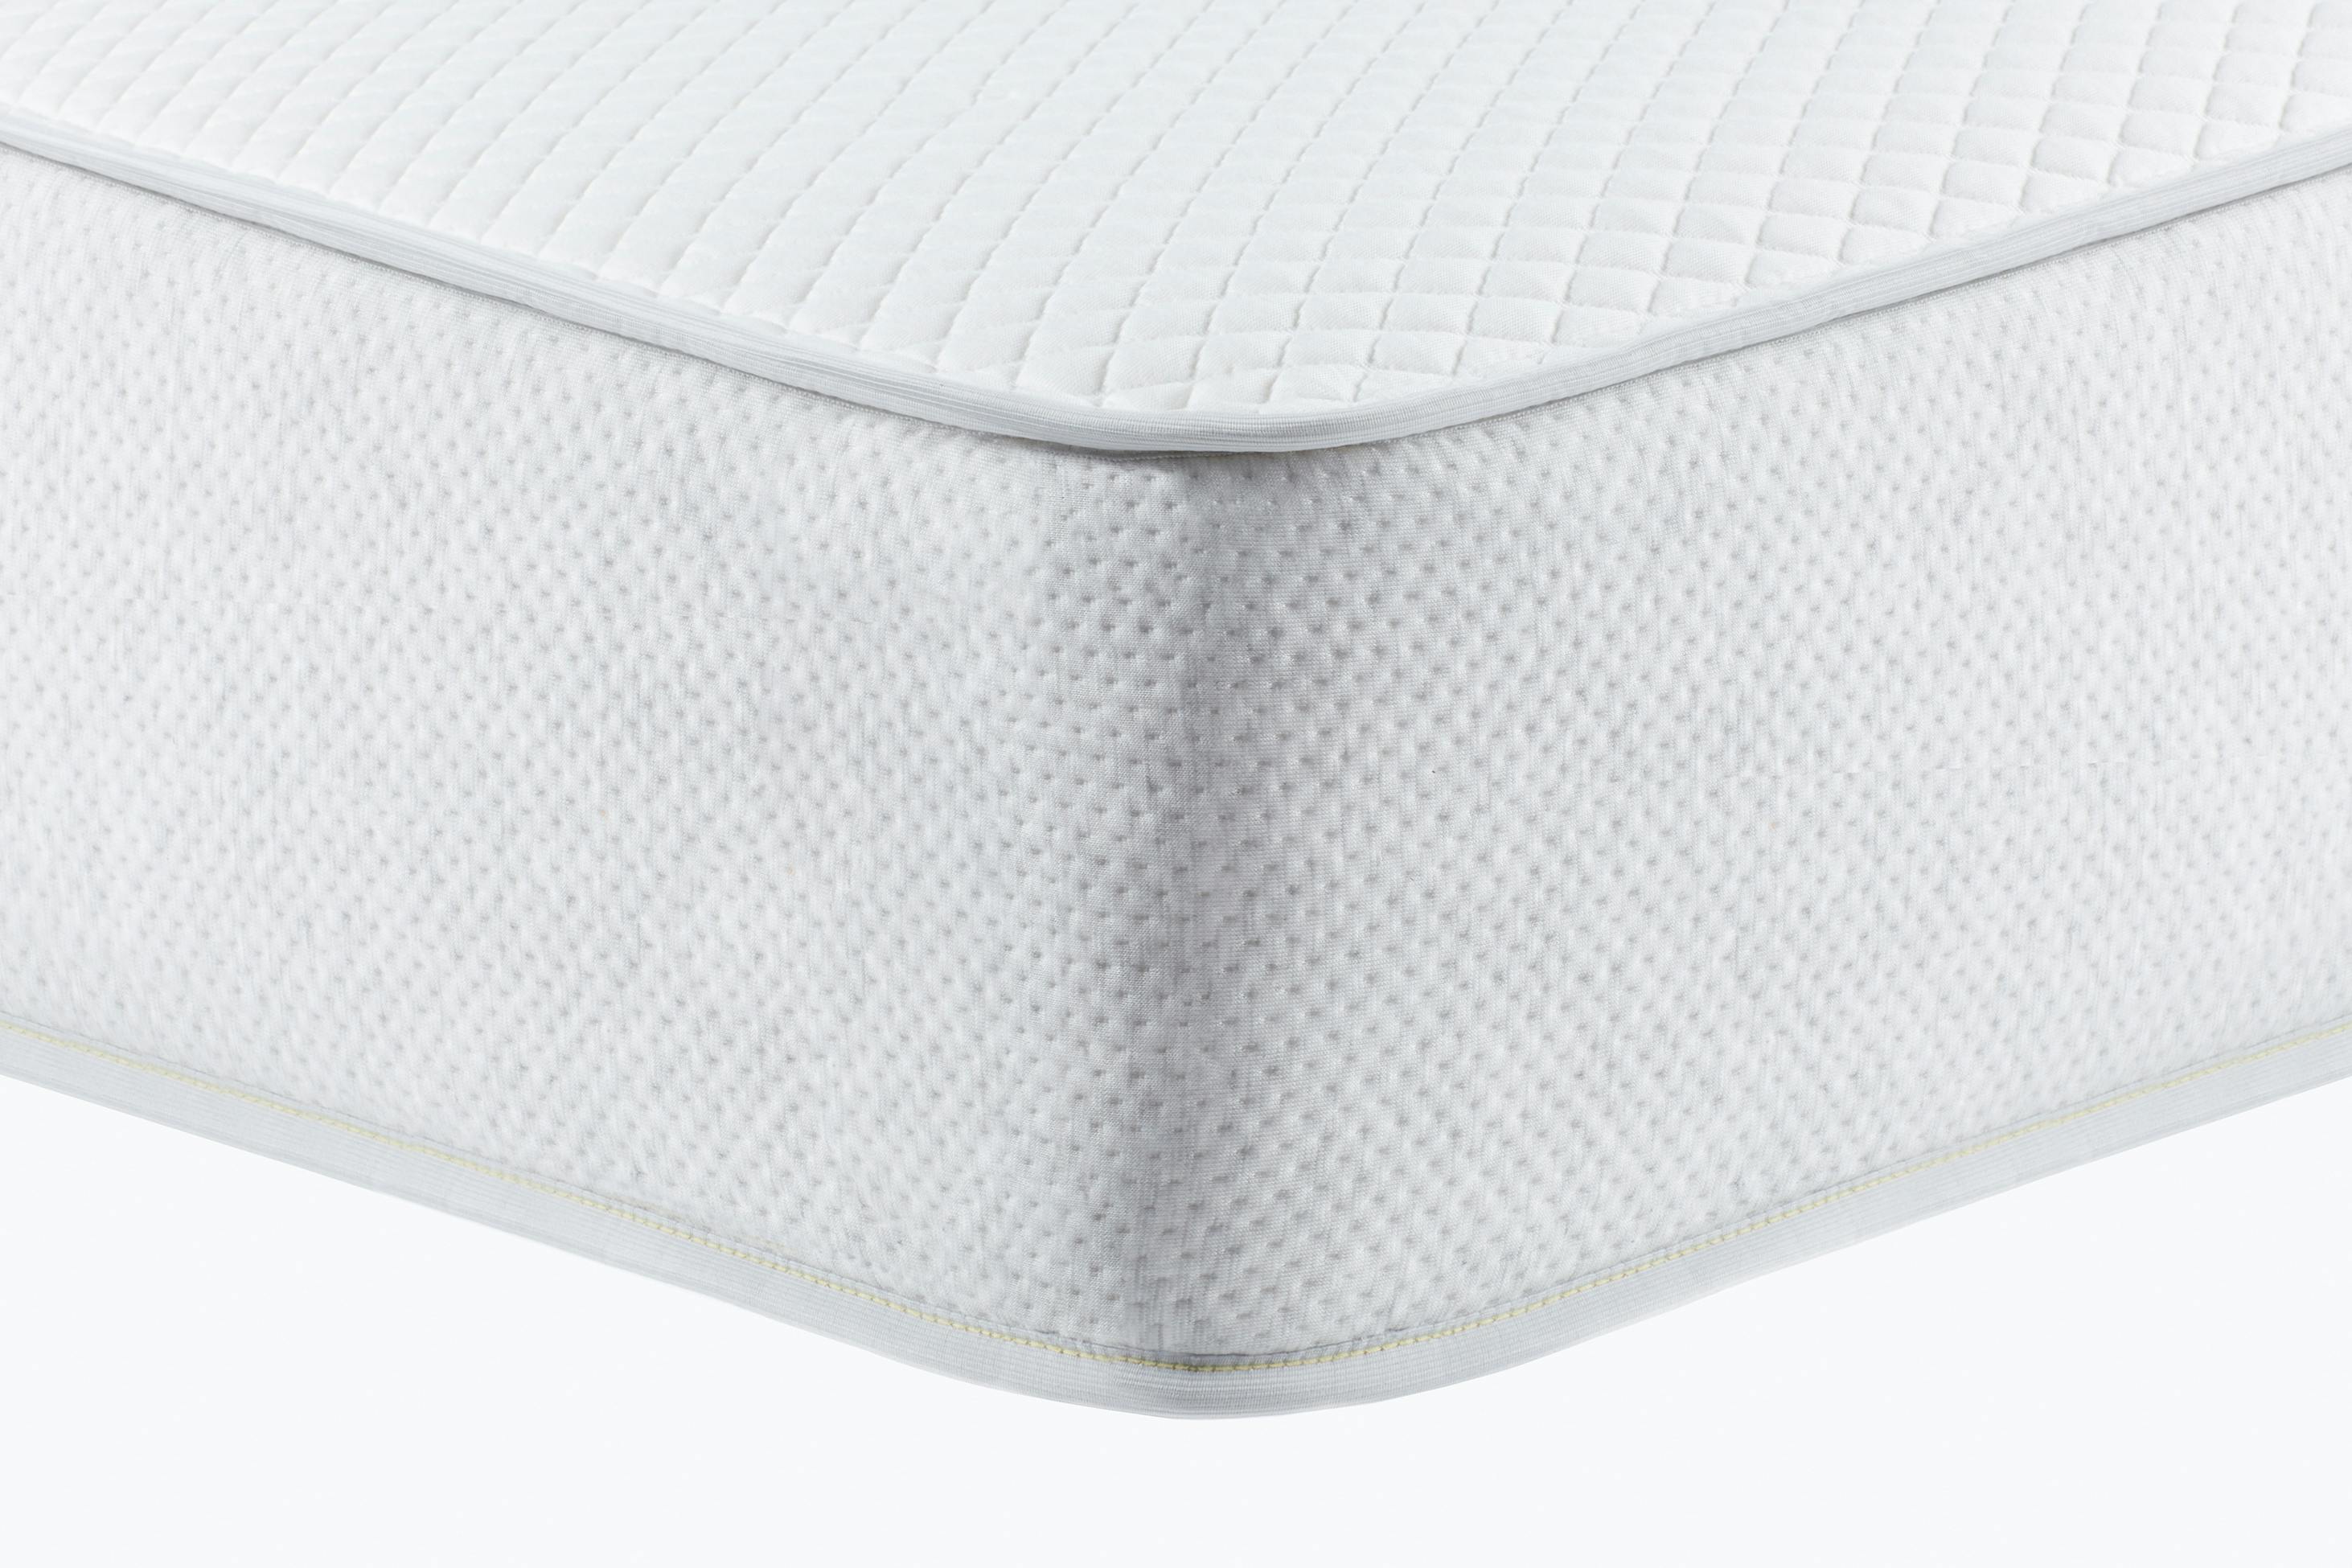 The Mattress Displayed in a Minimalistic Bedroom Setting